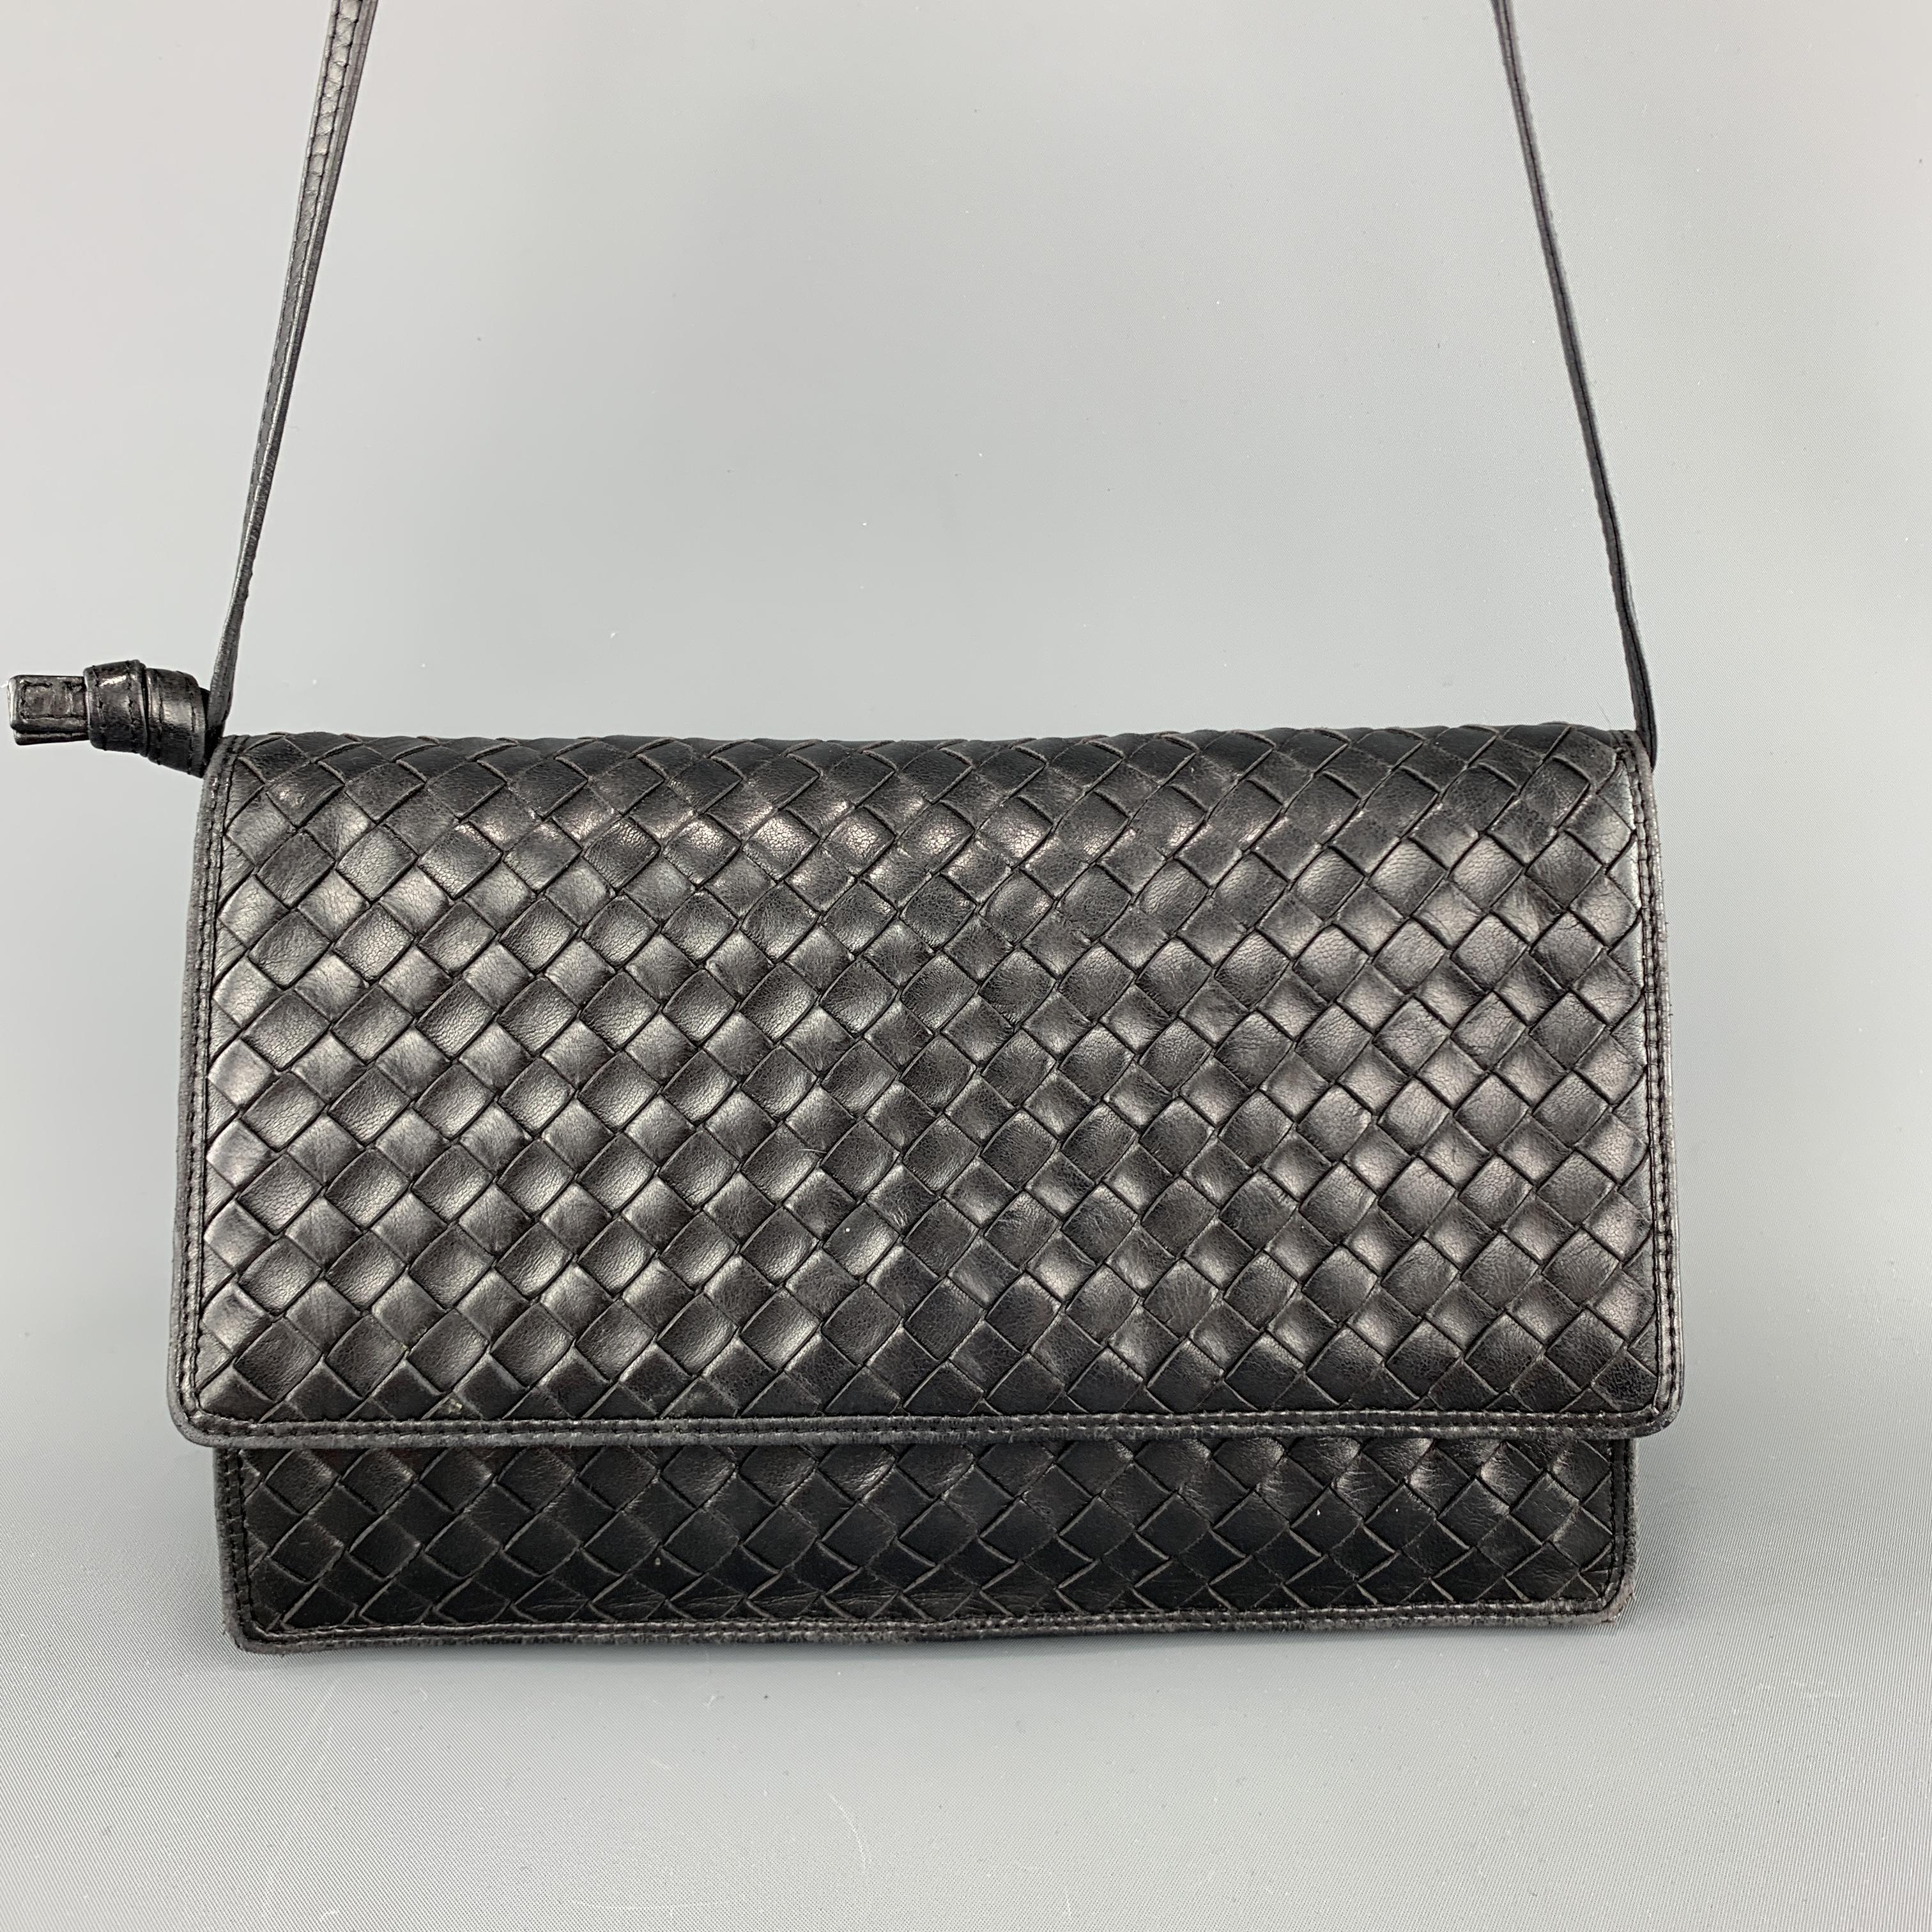 Vintage BOTTEGA VENETA shoulder bag come sin woven Intrecciato leather with a flap snap closure, slim knotted strap, and internal storage. Made in Italy.
 

Very Good Pre-Owned Condition.

Measurements:

Length: 10.5 in.
Width: 2 in.
Height: 6.75